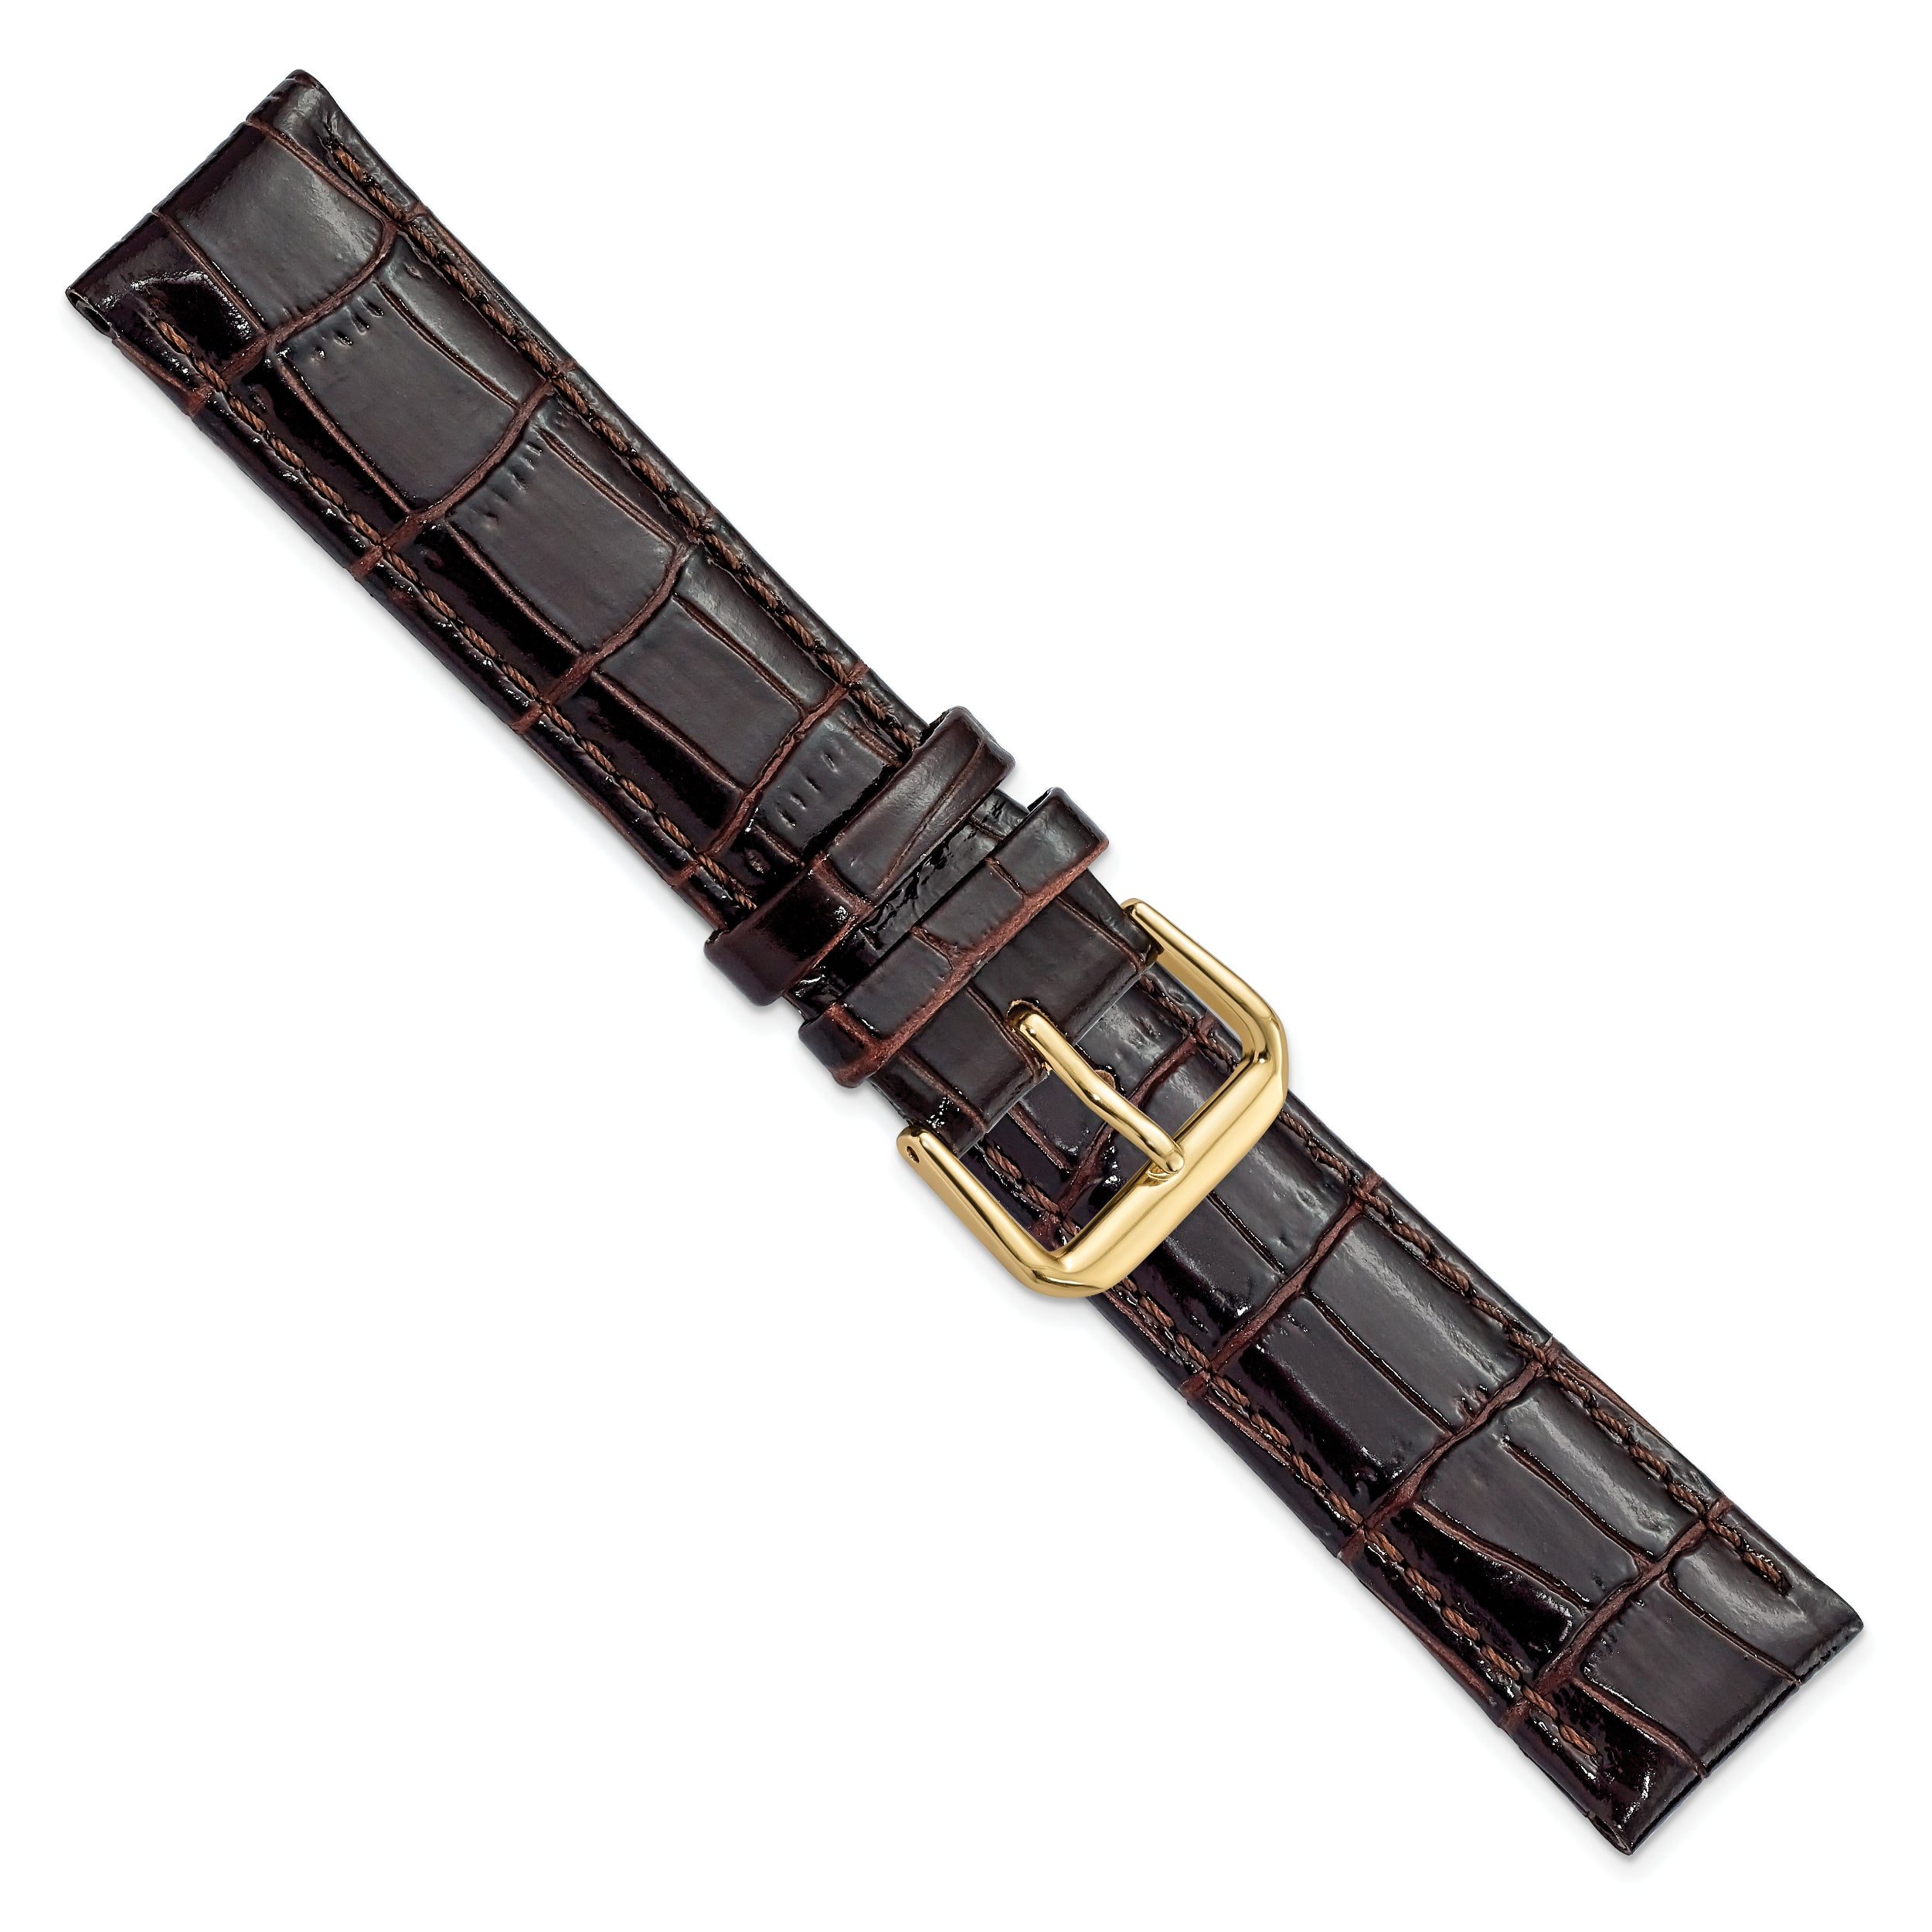 10mm Brown Crocodile Grain Leather with Dark Stitching and Gold-tone Buckle 6.75 inch Watch Band